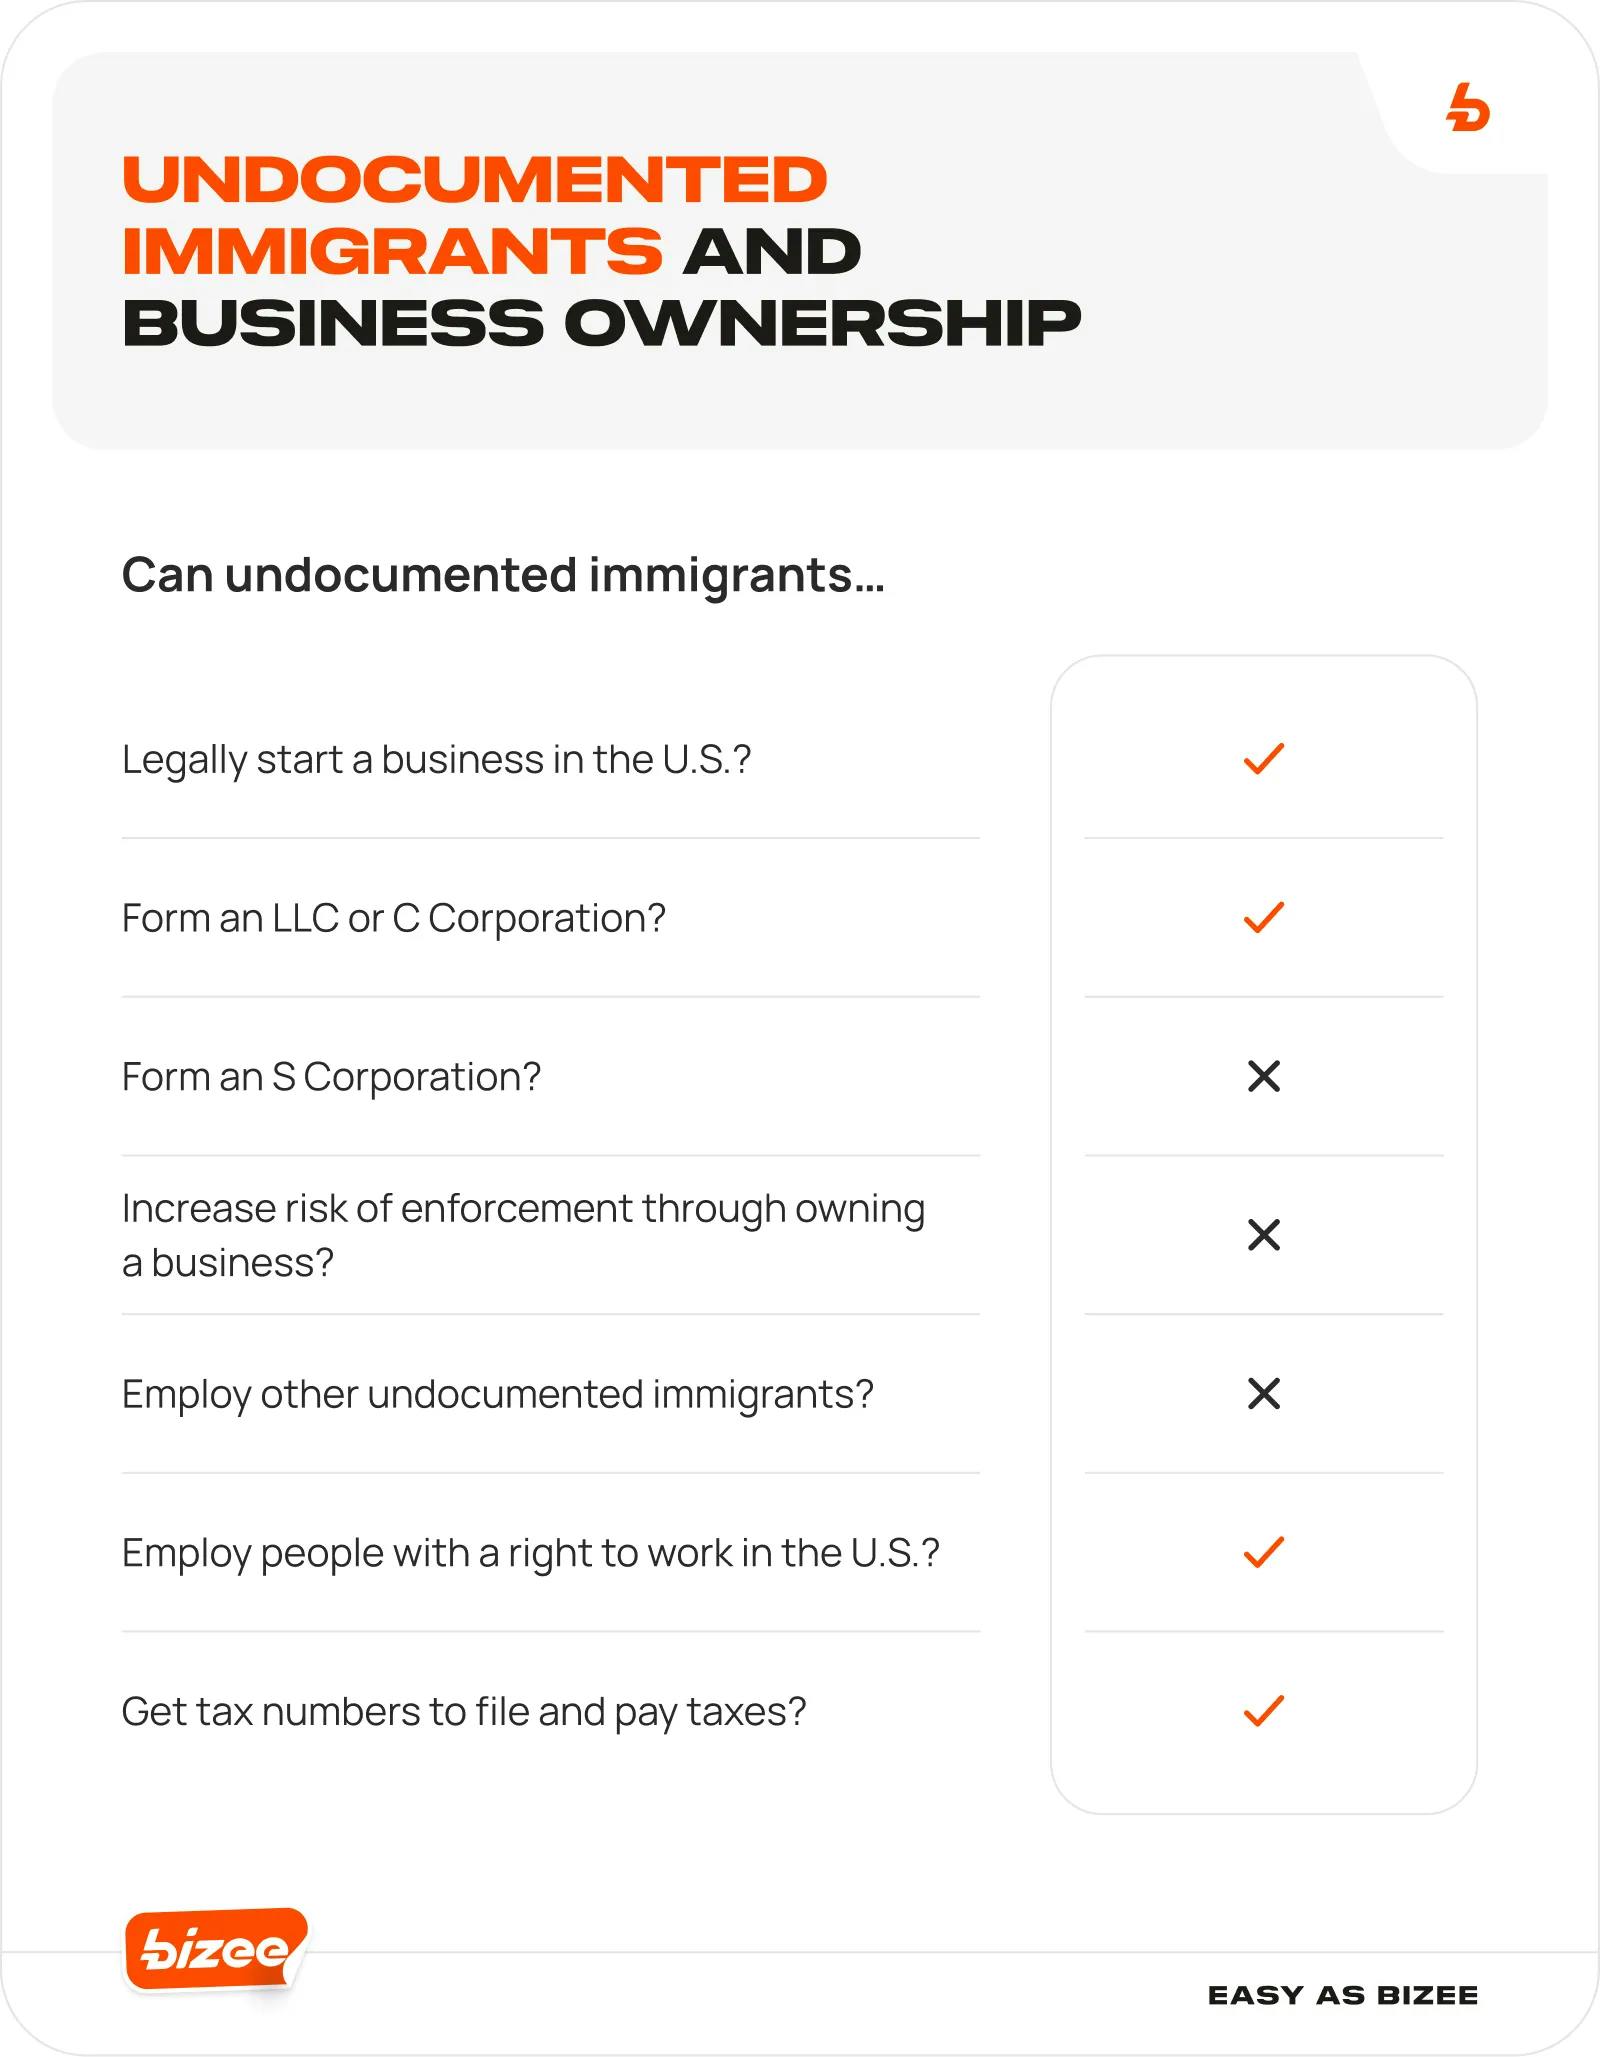 Undocumented Immigrants and Business Ownership